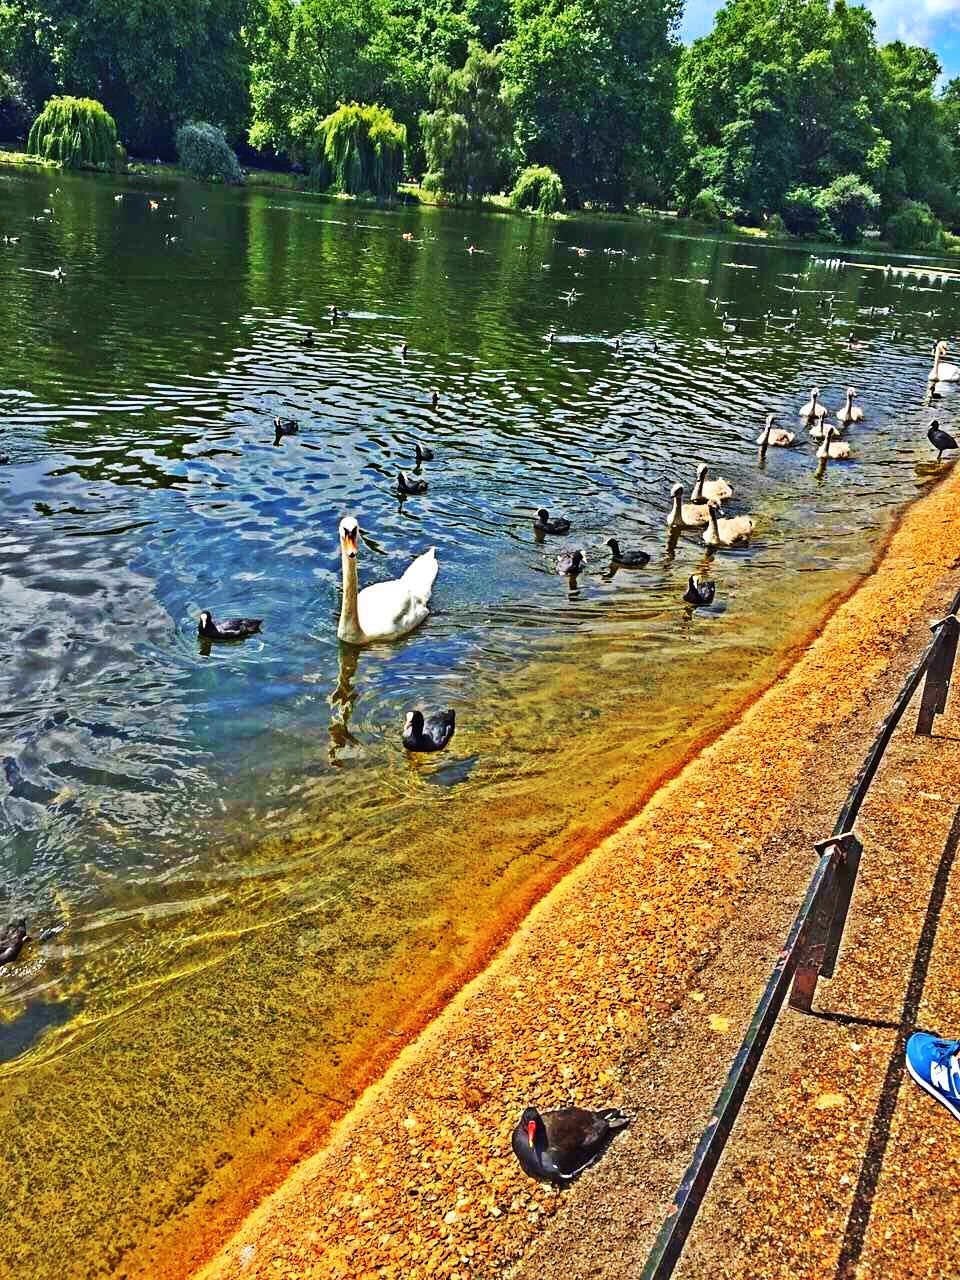 bird, animals in the wild, animal themes, wildlife, water, duck, flock of birds, tree, lake, nature, medium group of animals, high angle view, sunlight, tranquility, river, outdoors, day, beauty in nature, reflection